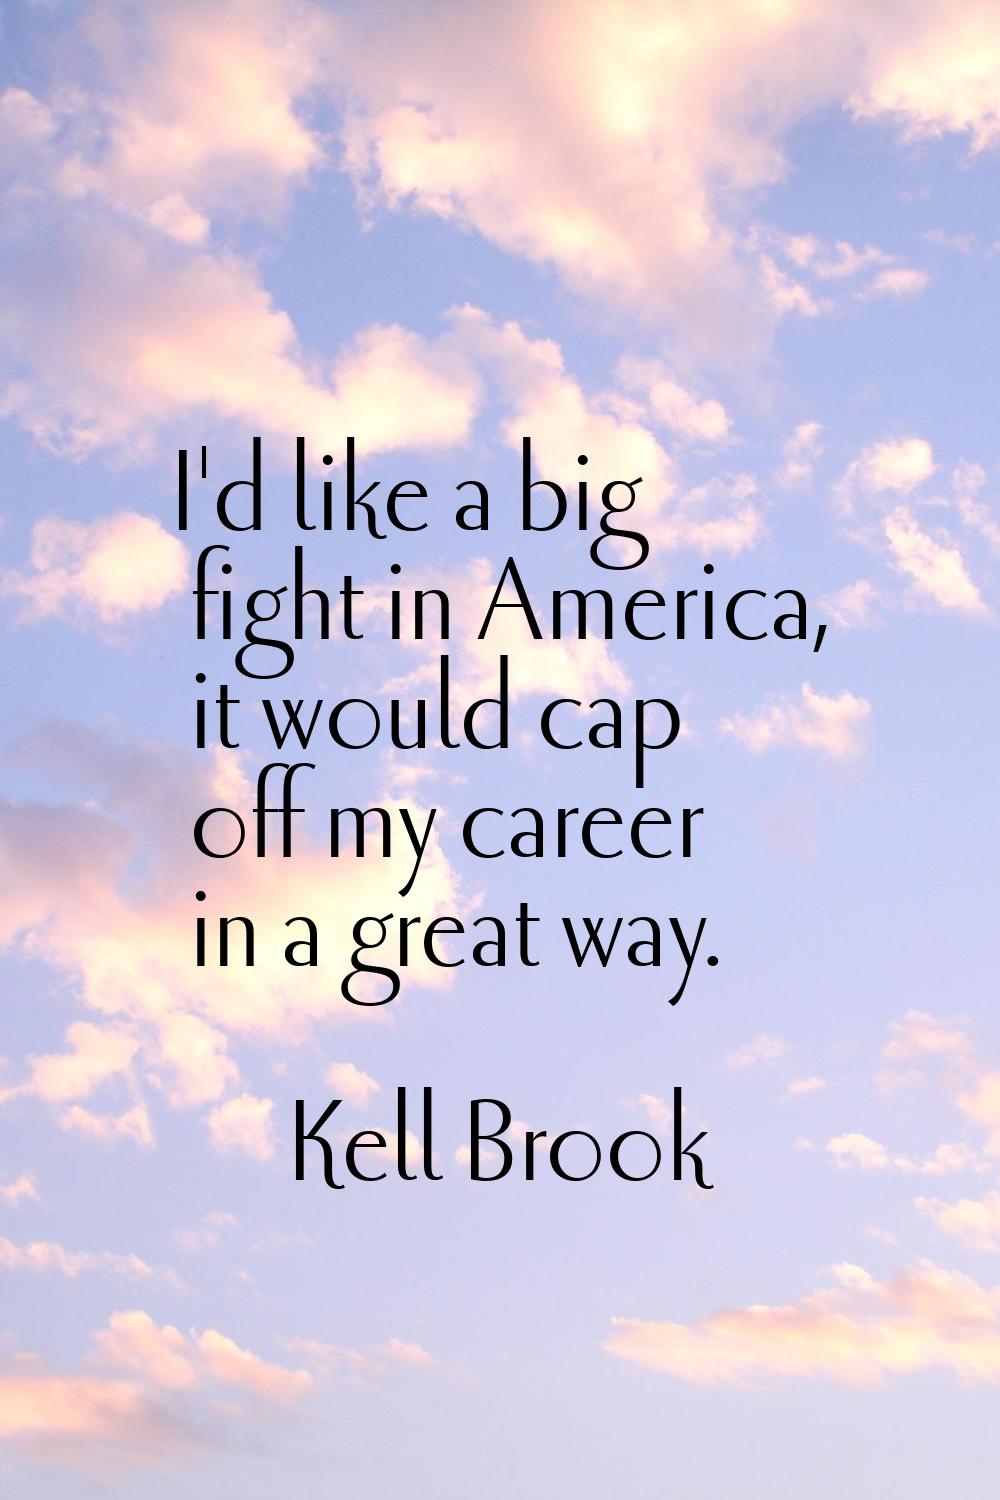 I'd like a big fight in America, it would cap off my career in a great way.